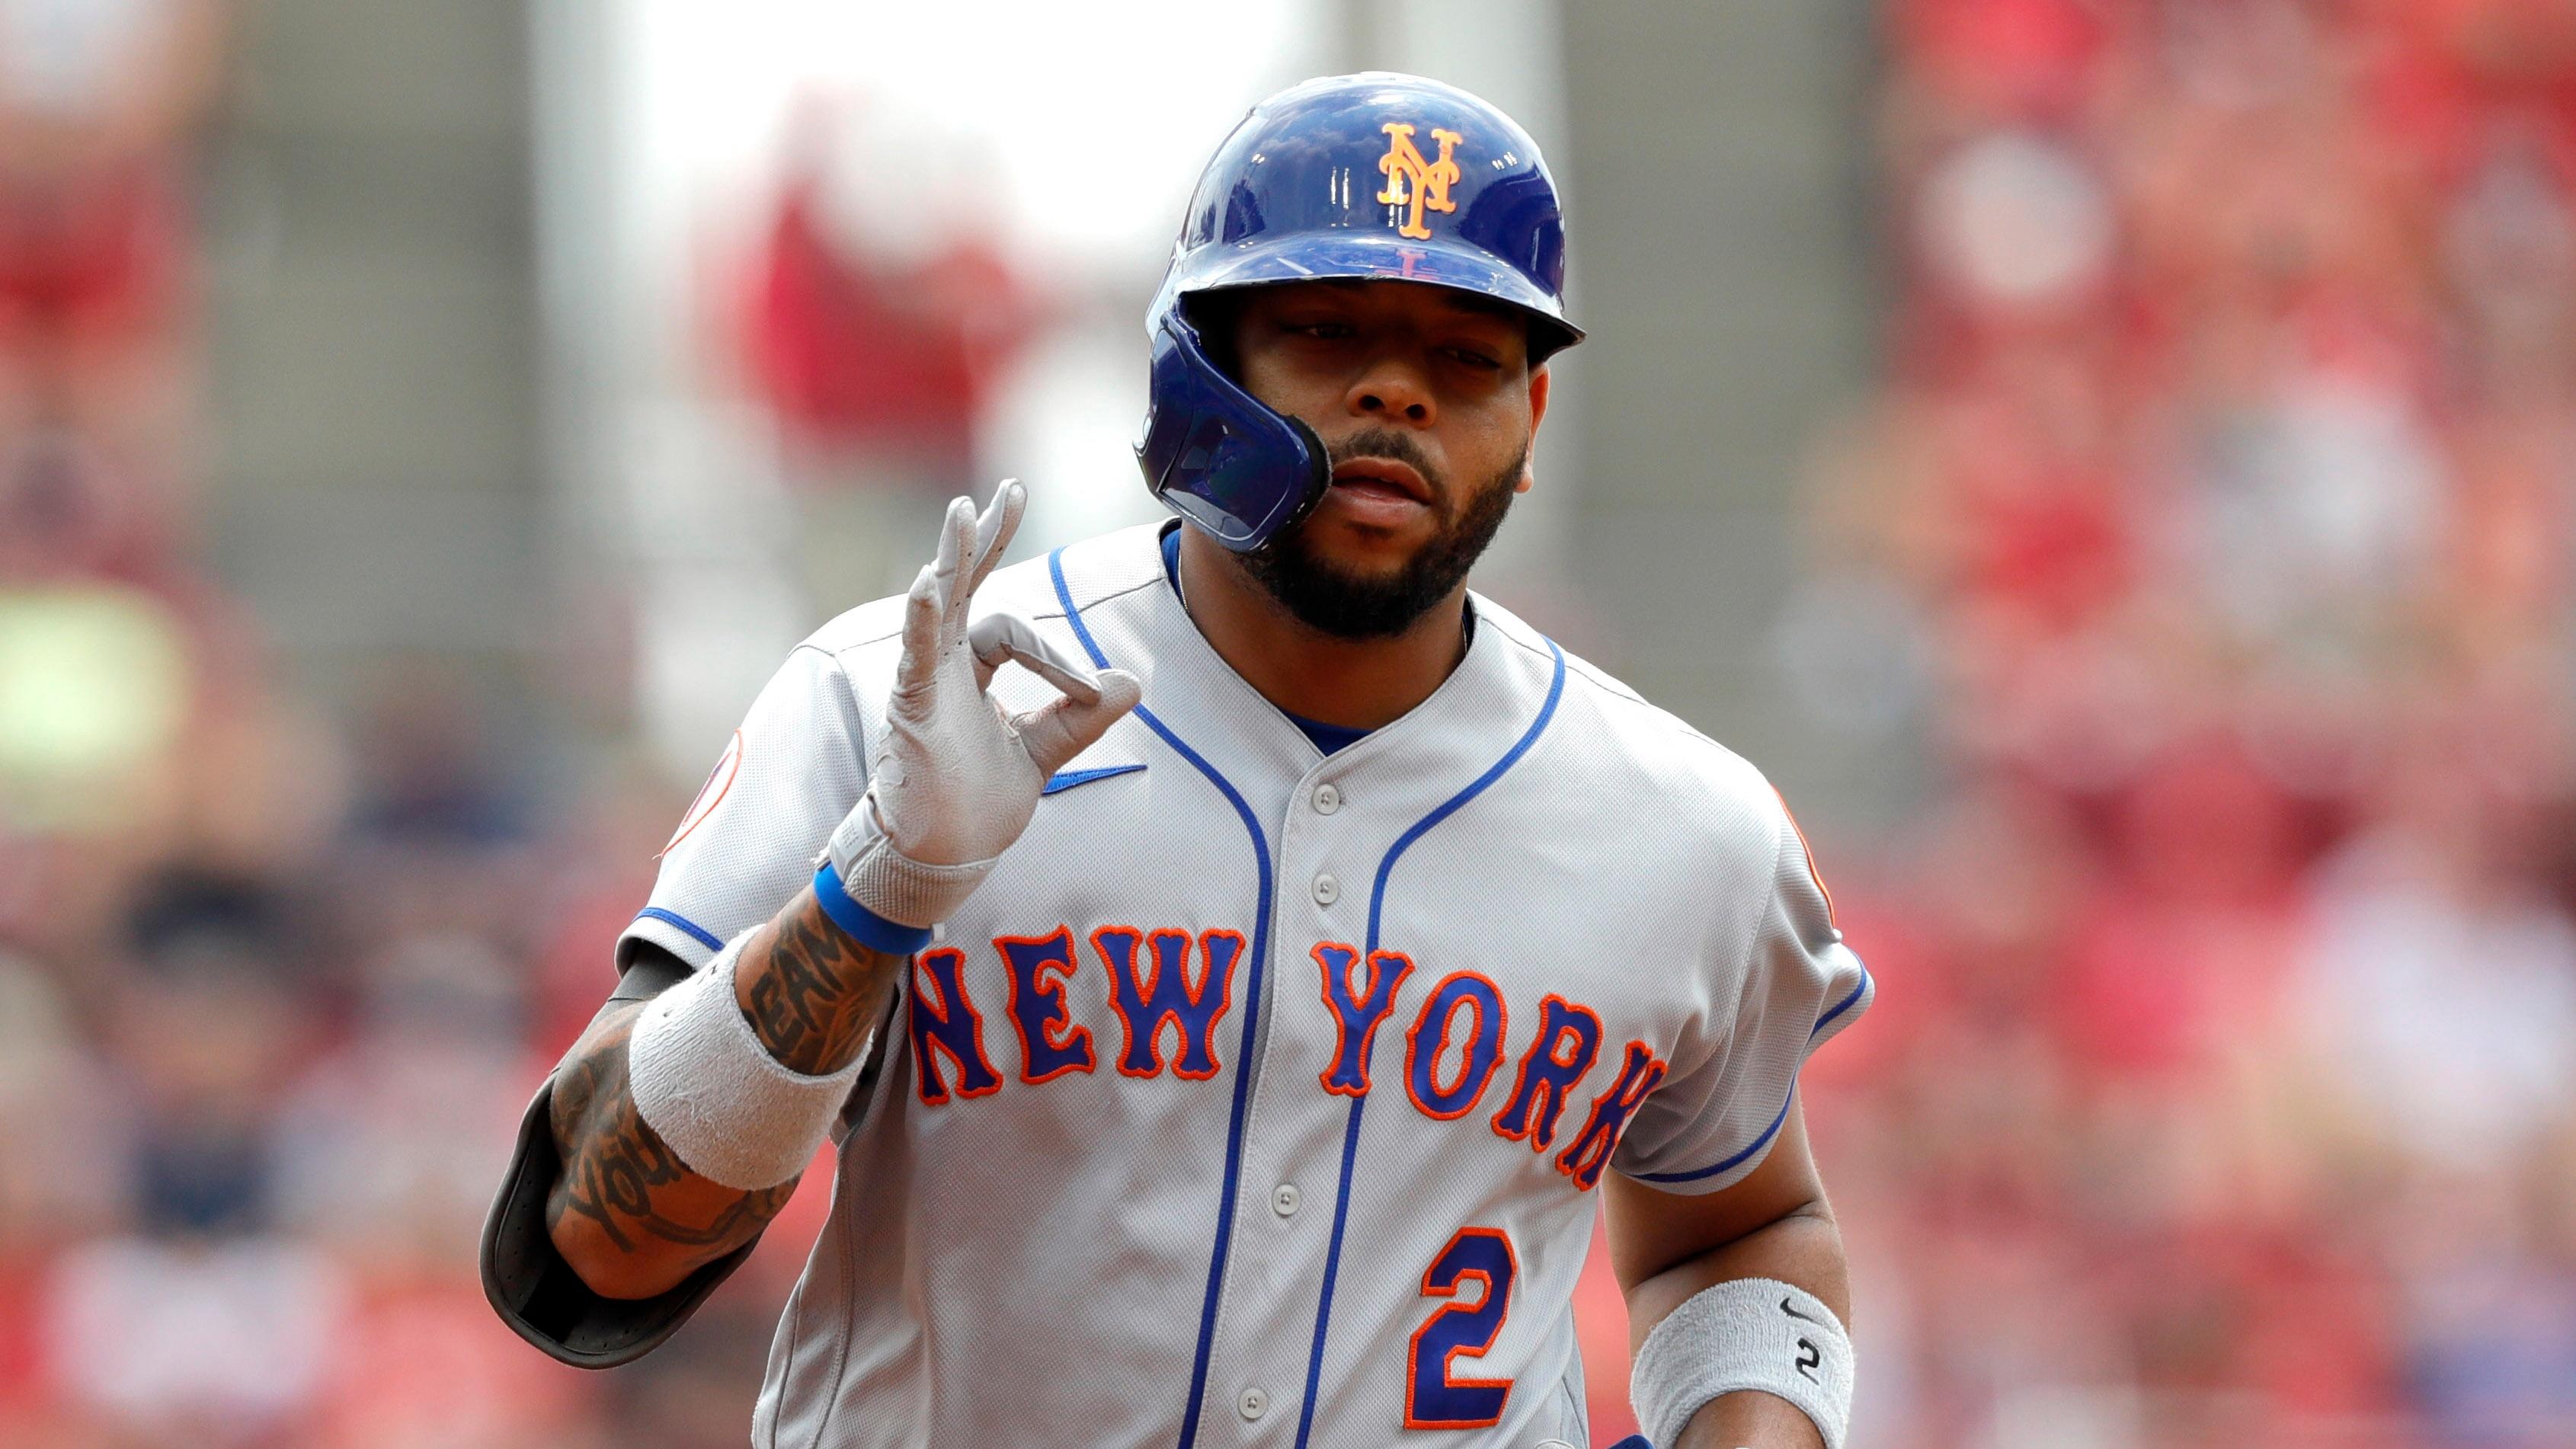 New York Mets left fielder Dominic Smith (2) reacts after hitting a grand slam home run against the Cincinnati Reds in the third inning at Great American Ball Park. / David Kohl - USA TODAY Sports